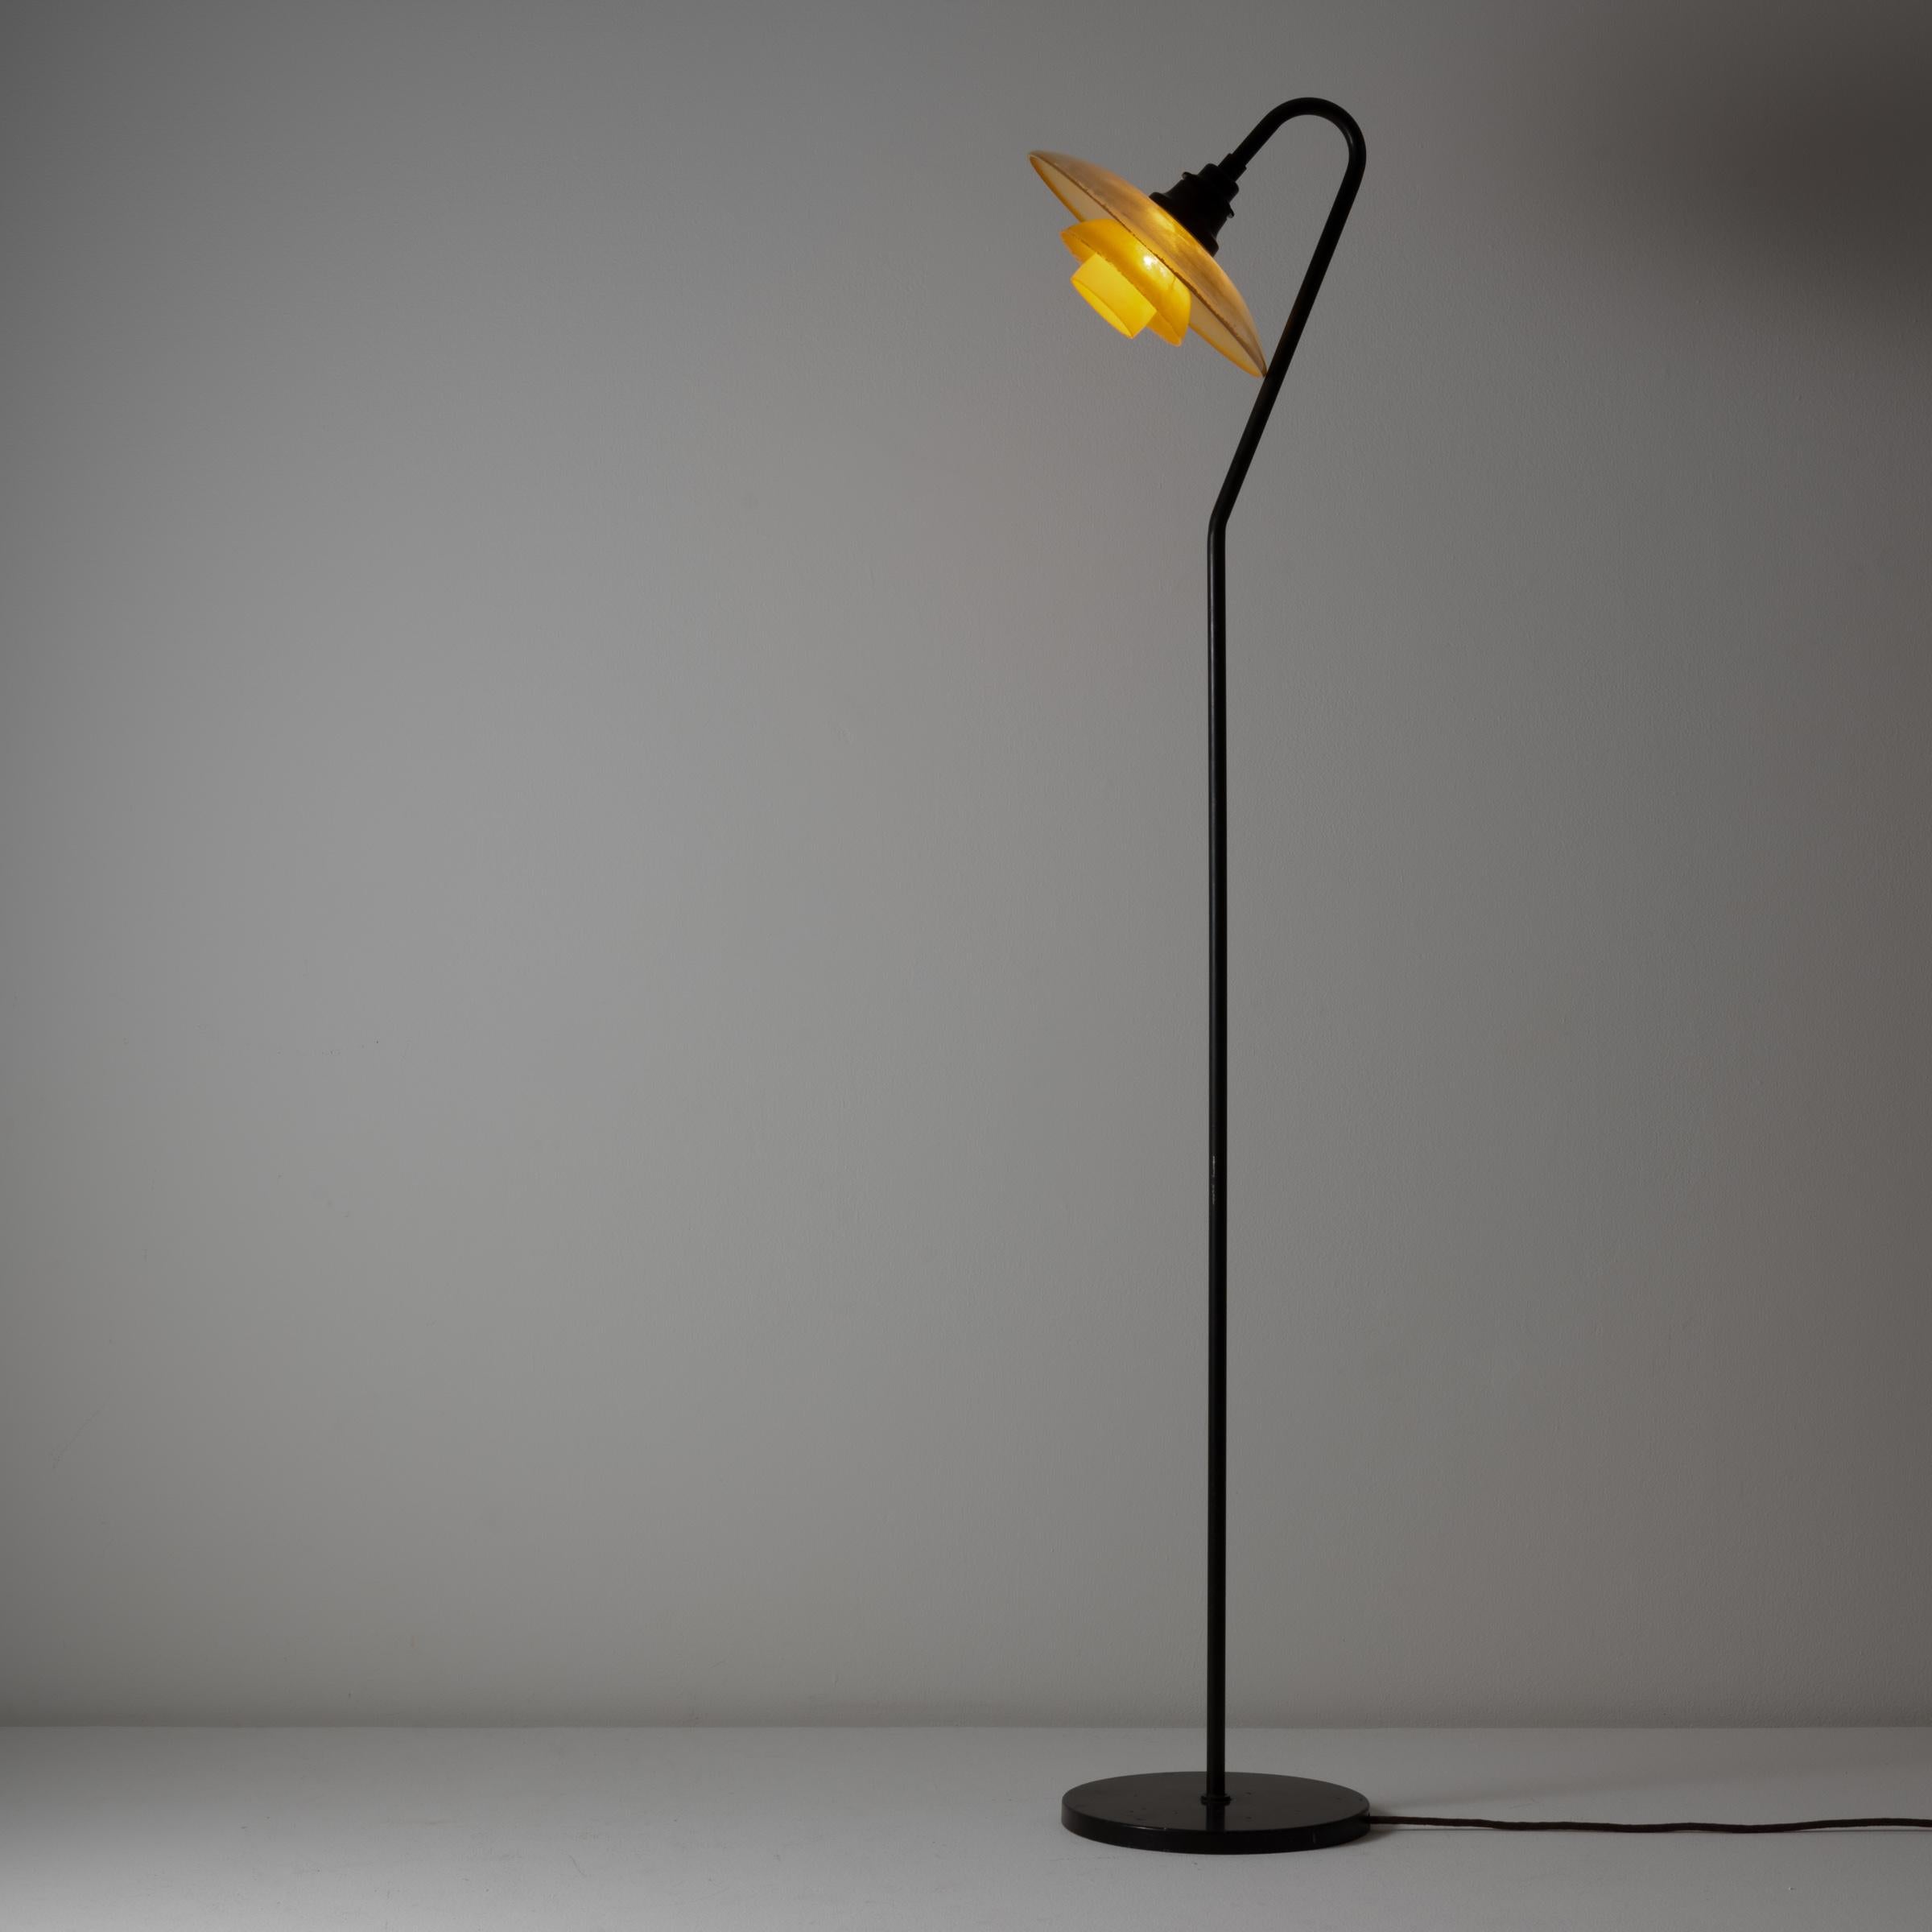 Rare PH 3/2 Floor Lamp by Poul Henningsen. Designed and manufactured in Denmark, 1931. Amber glass shade with original stamp, metal base and stem, original cord. We recommend one E27 100w maximum bulb. Bulbs not provided.